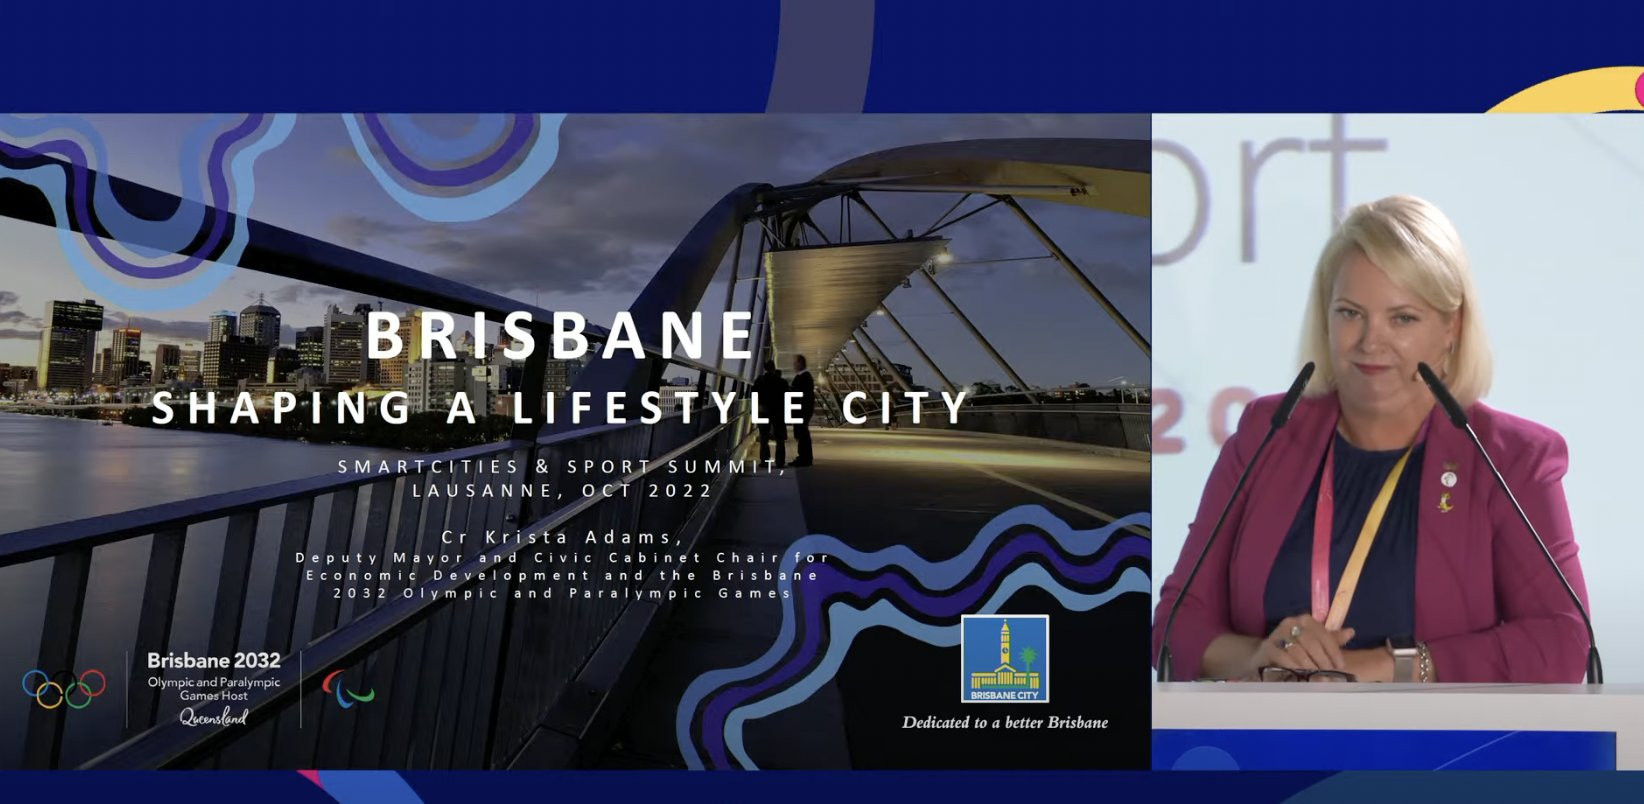 Brisbane Deputy Mayor Krista Adams encouraged others to come to Brisbane prior to the 2032 Olympics ©smartcities